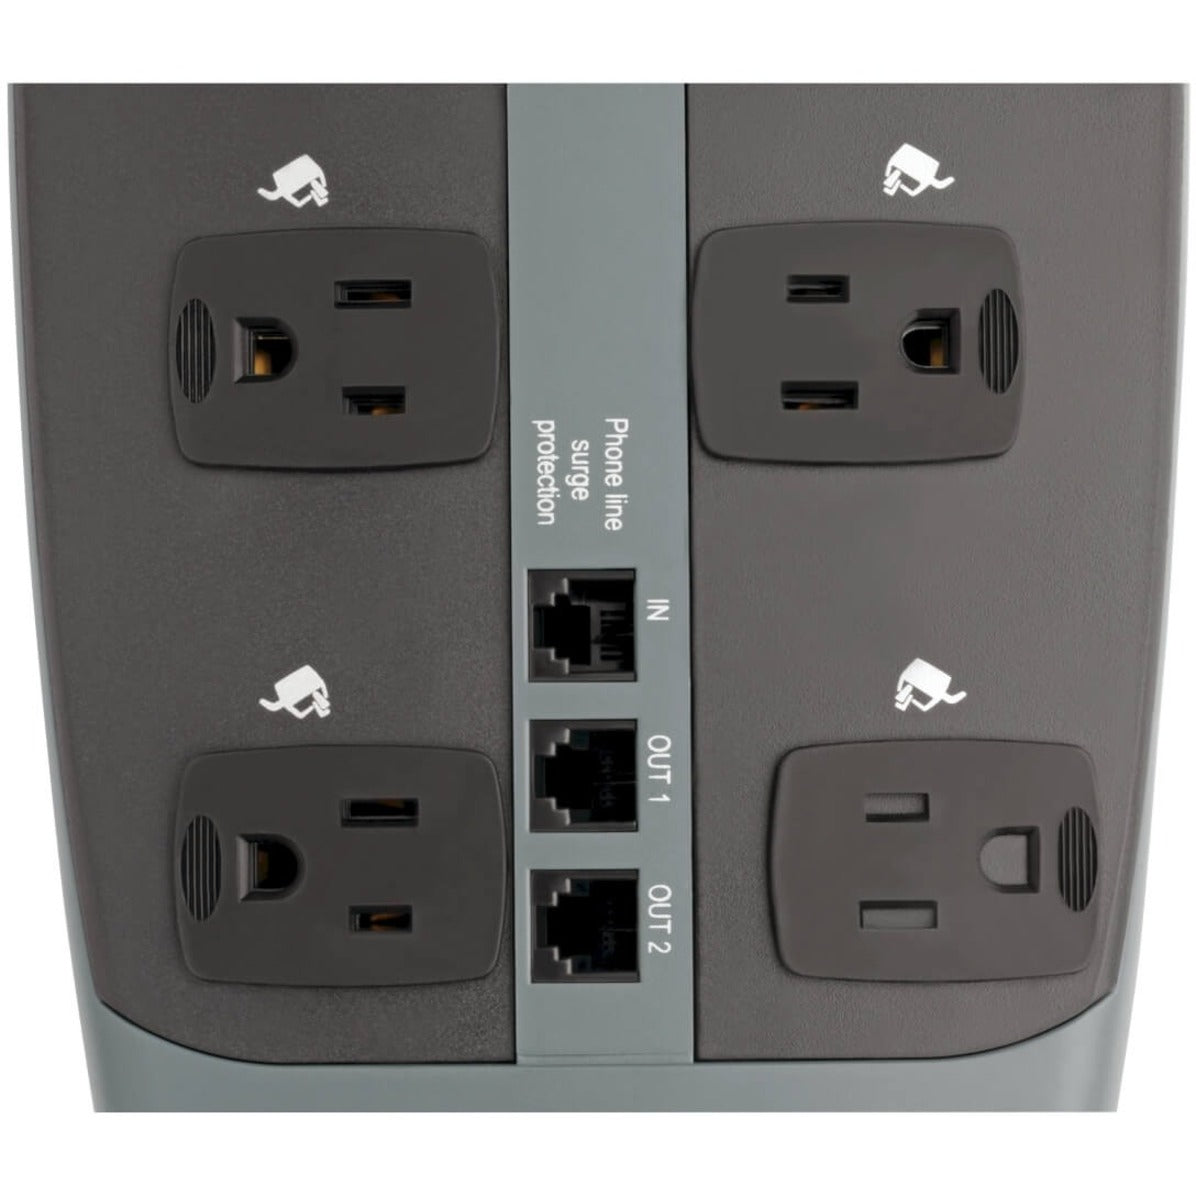 Tripp Lite Protect It! 10-Outlet Surge Protector 8 ft. (2.43 m) Cord 3345 Joules Tel/Modem/Coaxial Protection